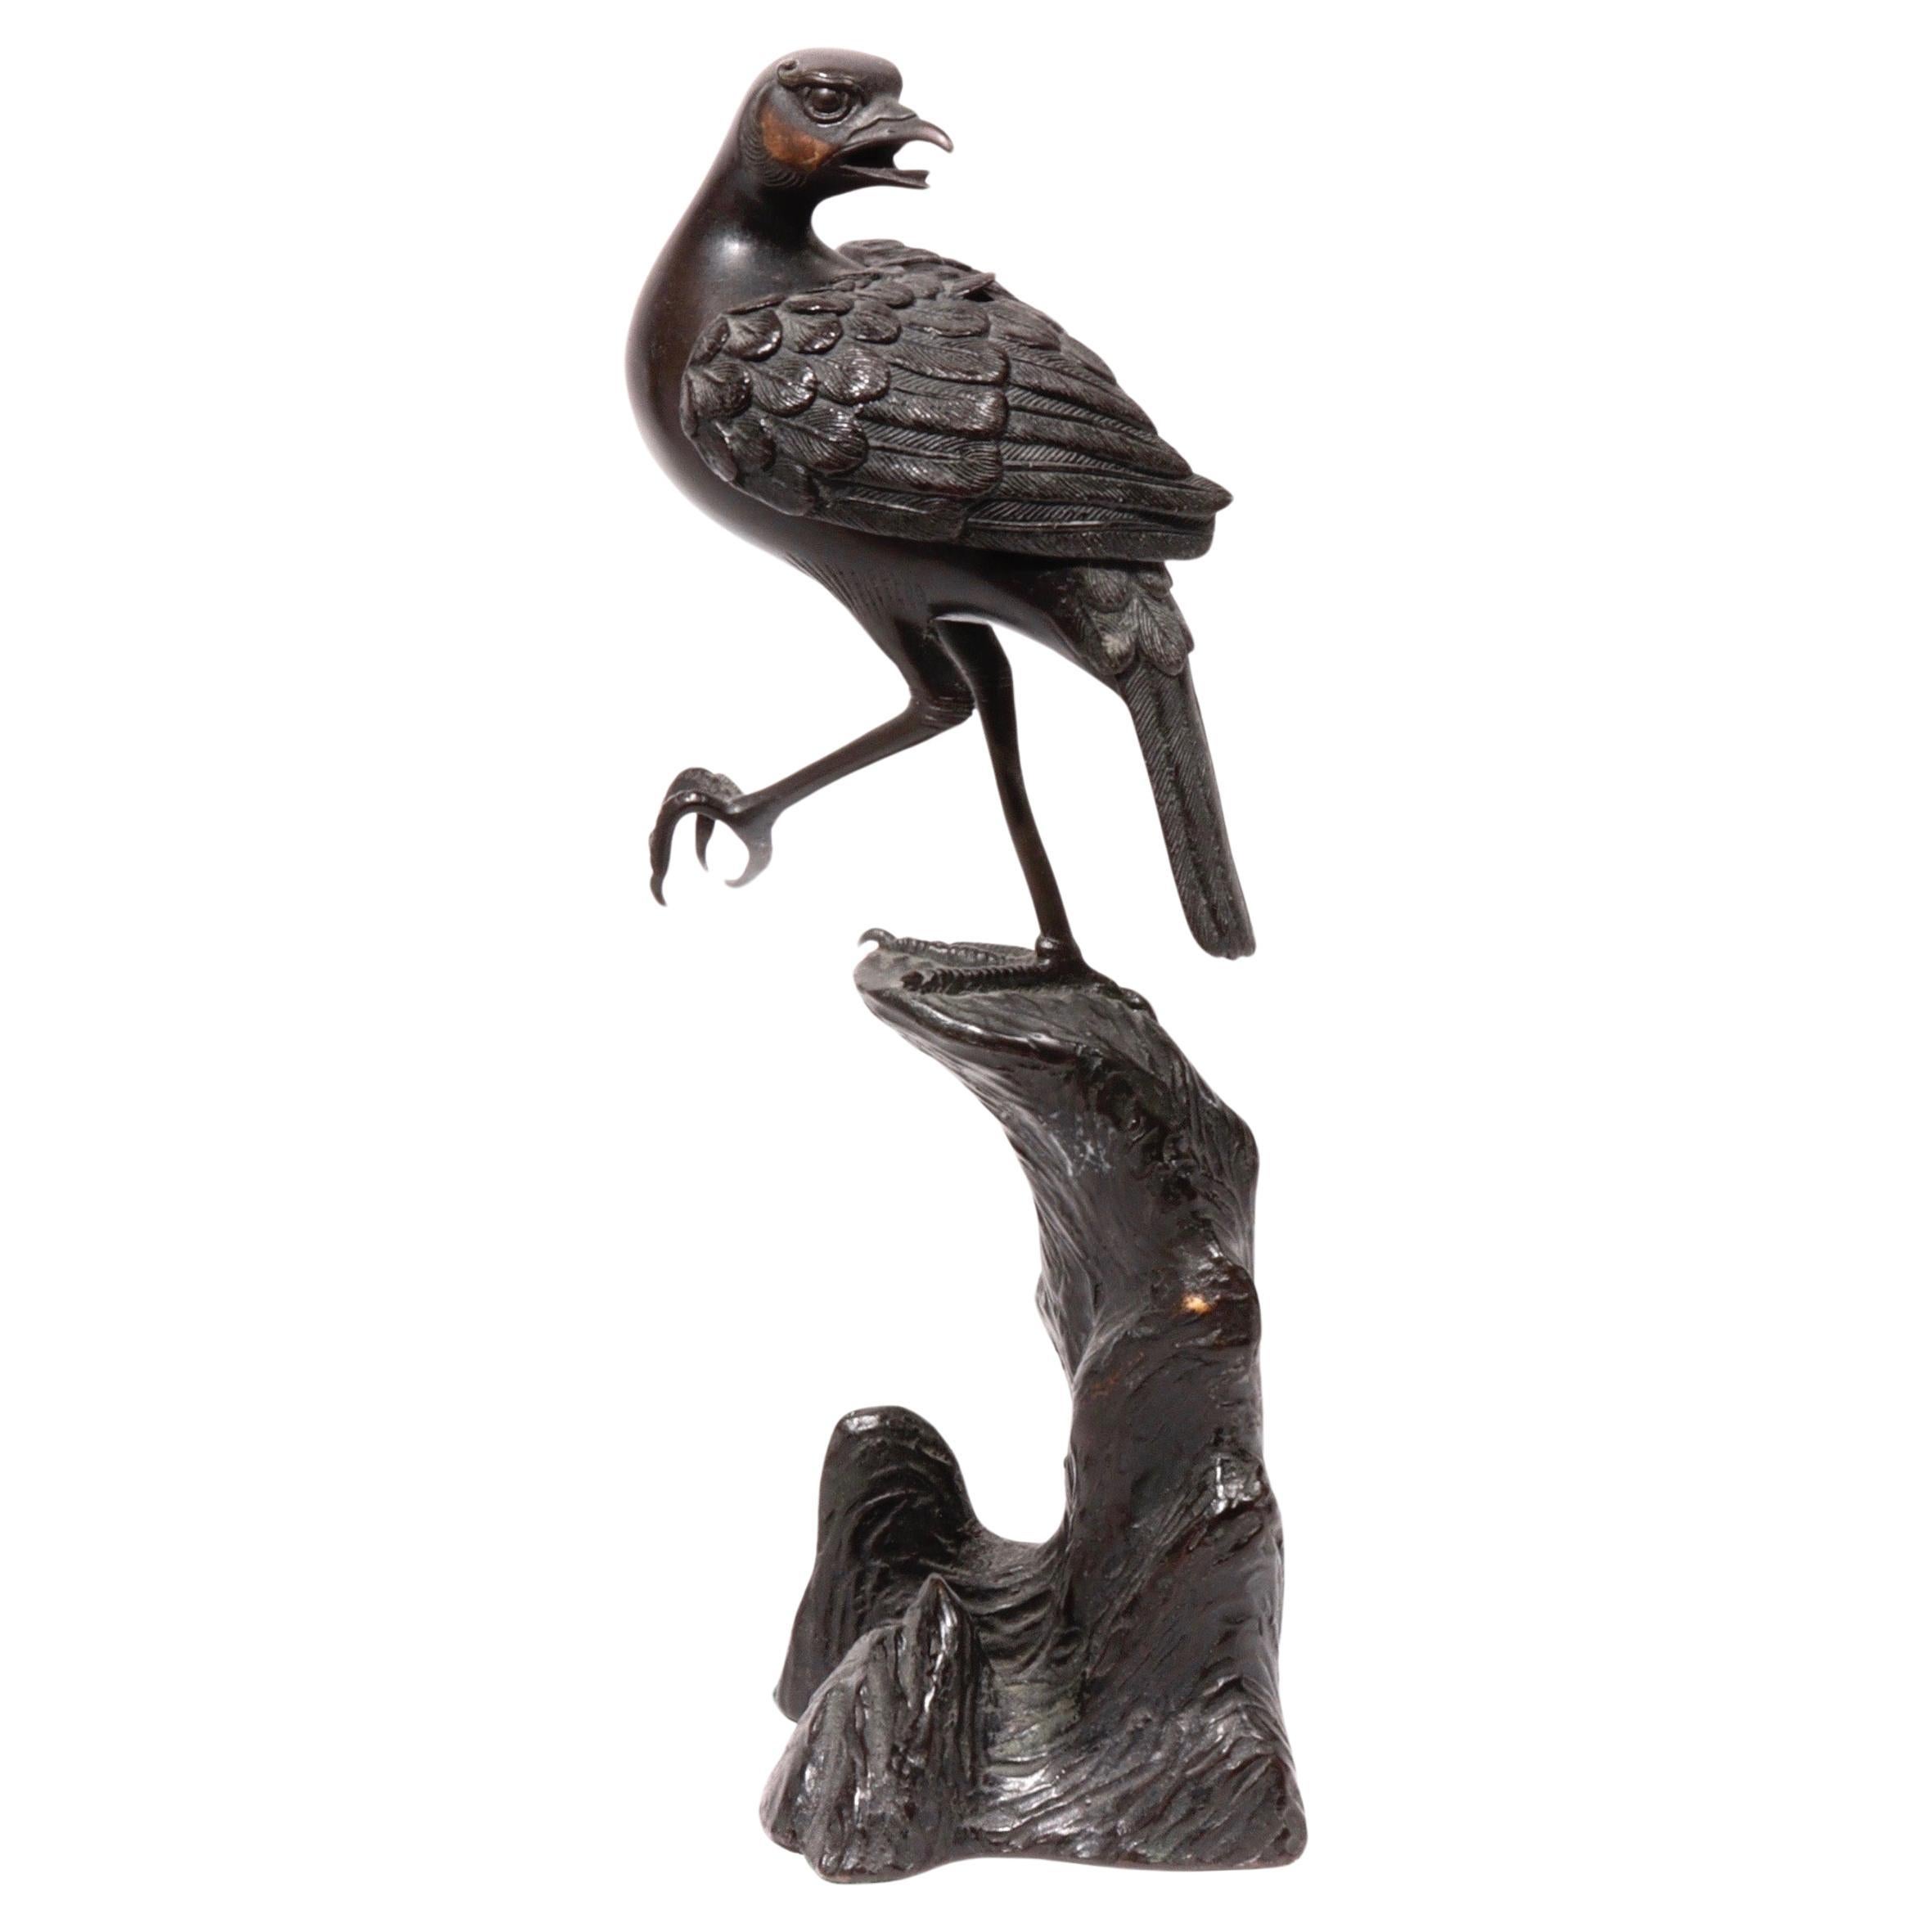 Antique Japanese bronze incense burner, in the form of a bird